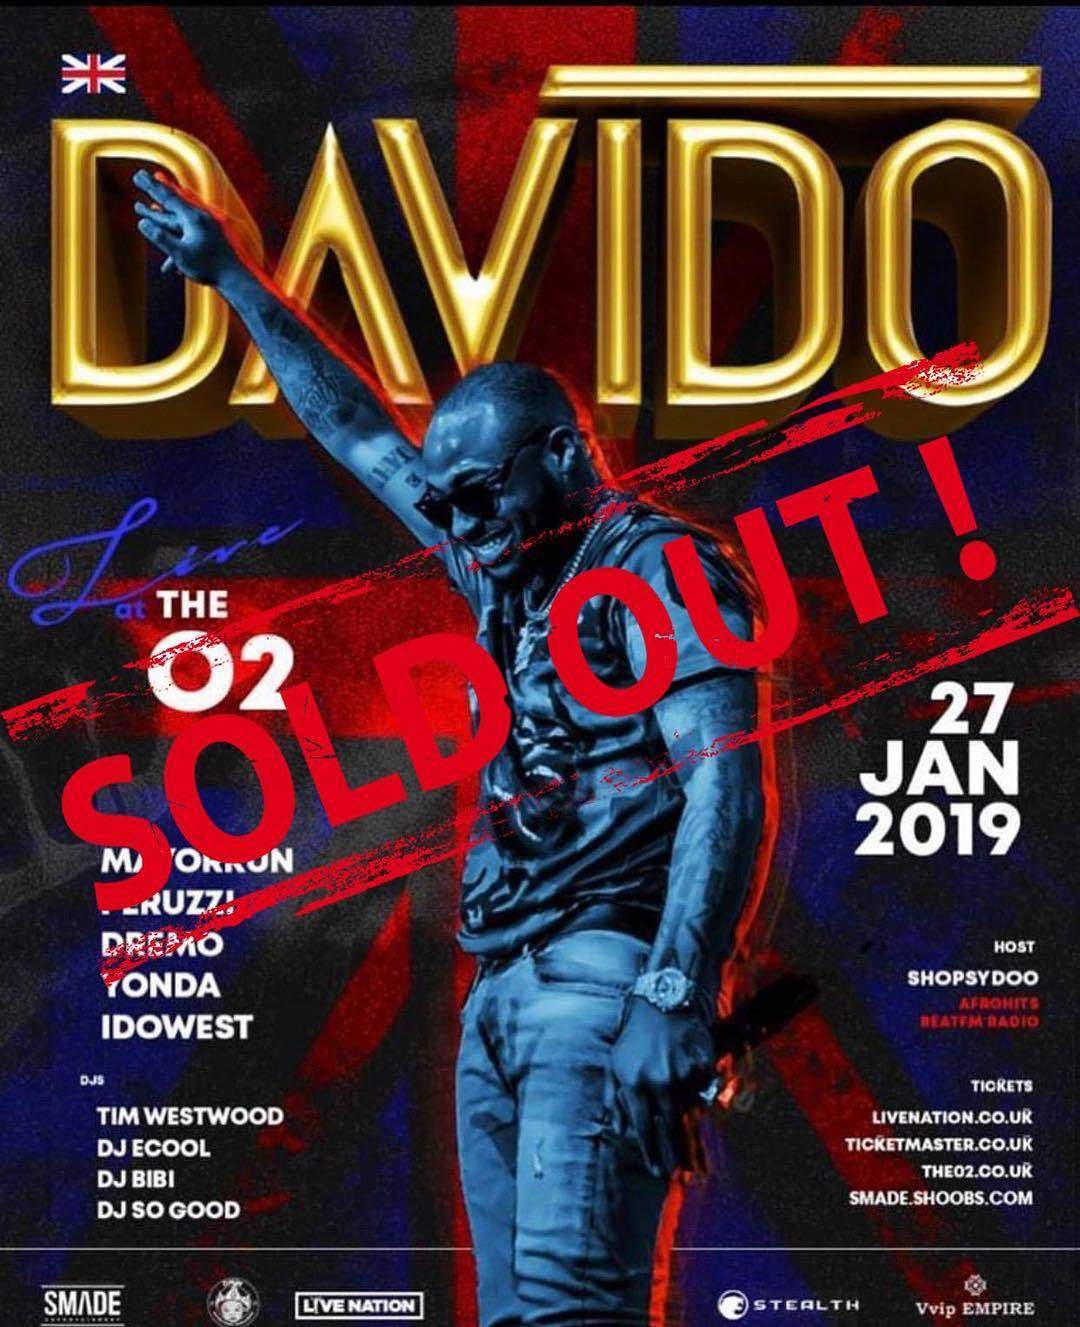 UK Media, Guardian also say Davido's 02 Arena concert wasn't 'sold out'